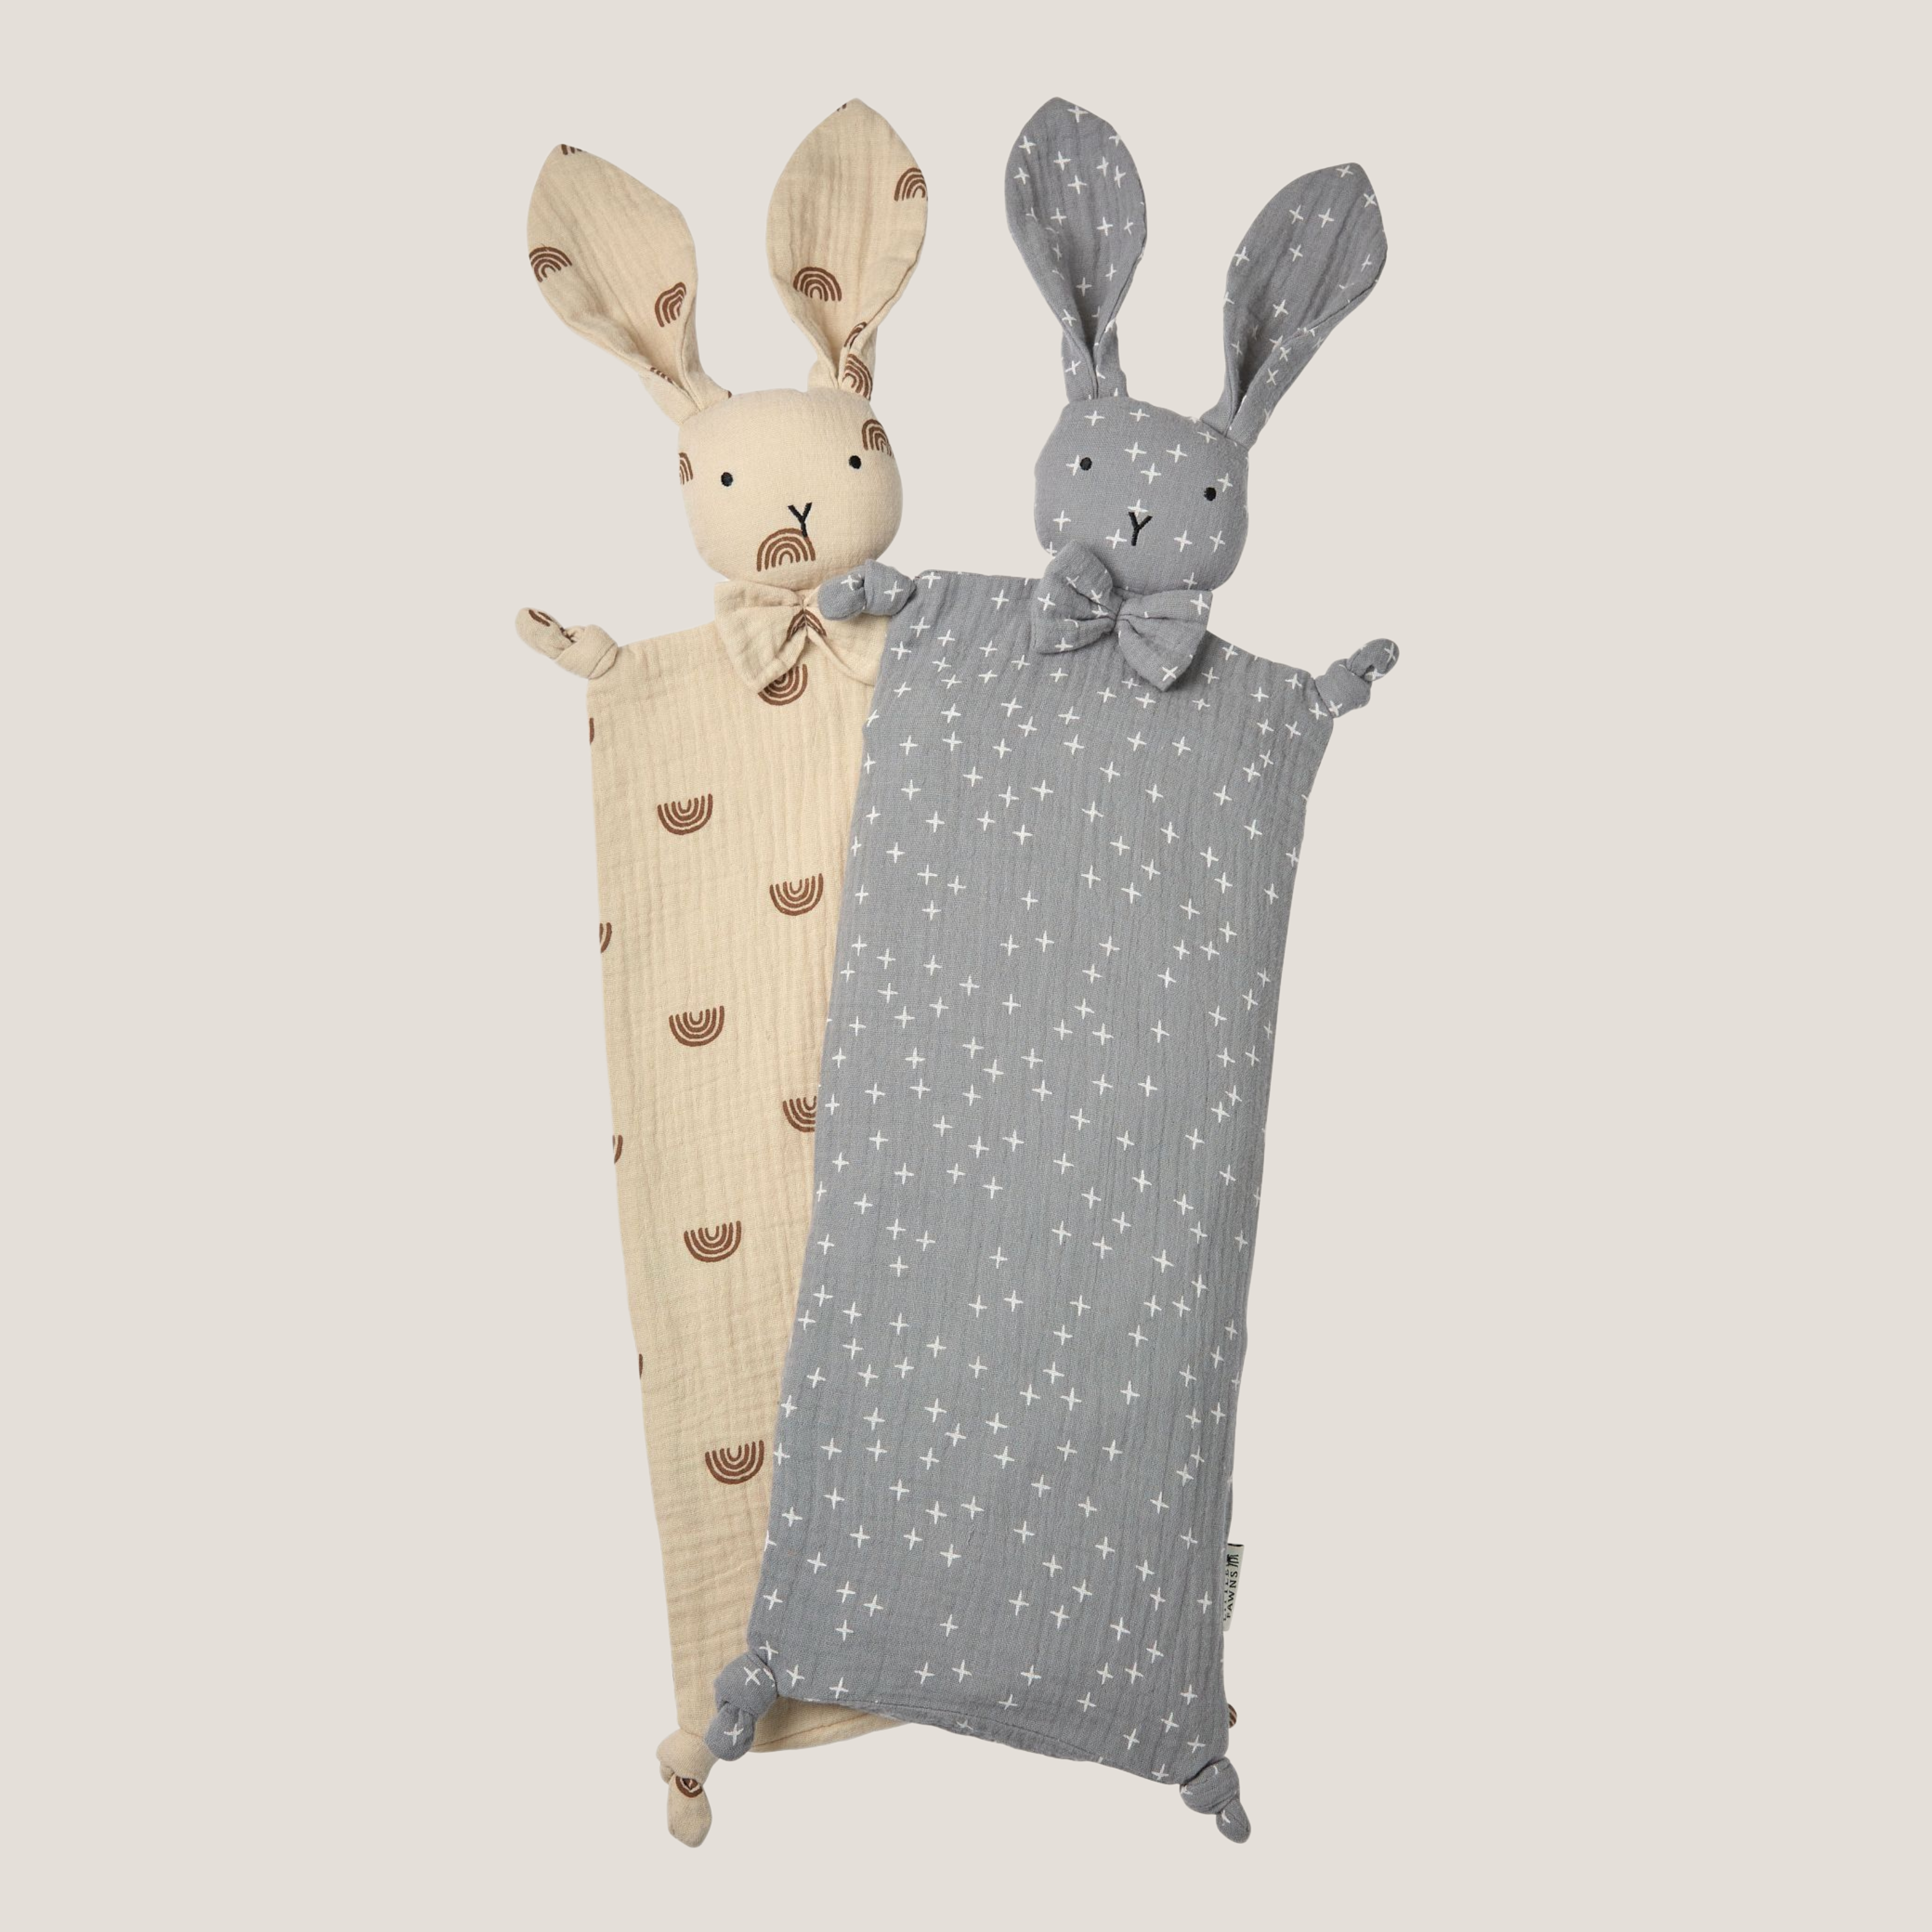 Snuggly Bunny Beansprout Husk Pillow + Cover Bundle (Pebble Grey Star & Ivory Beige Rainbow)